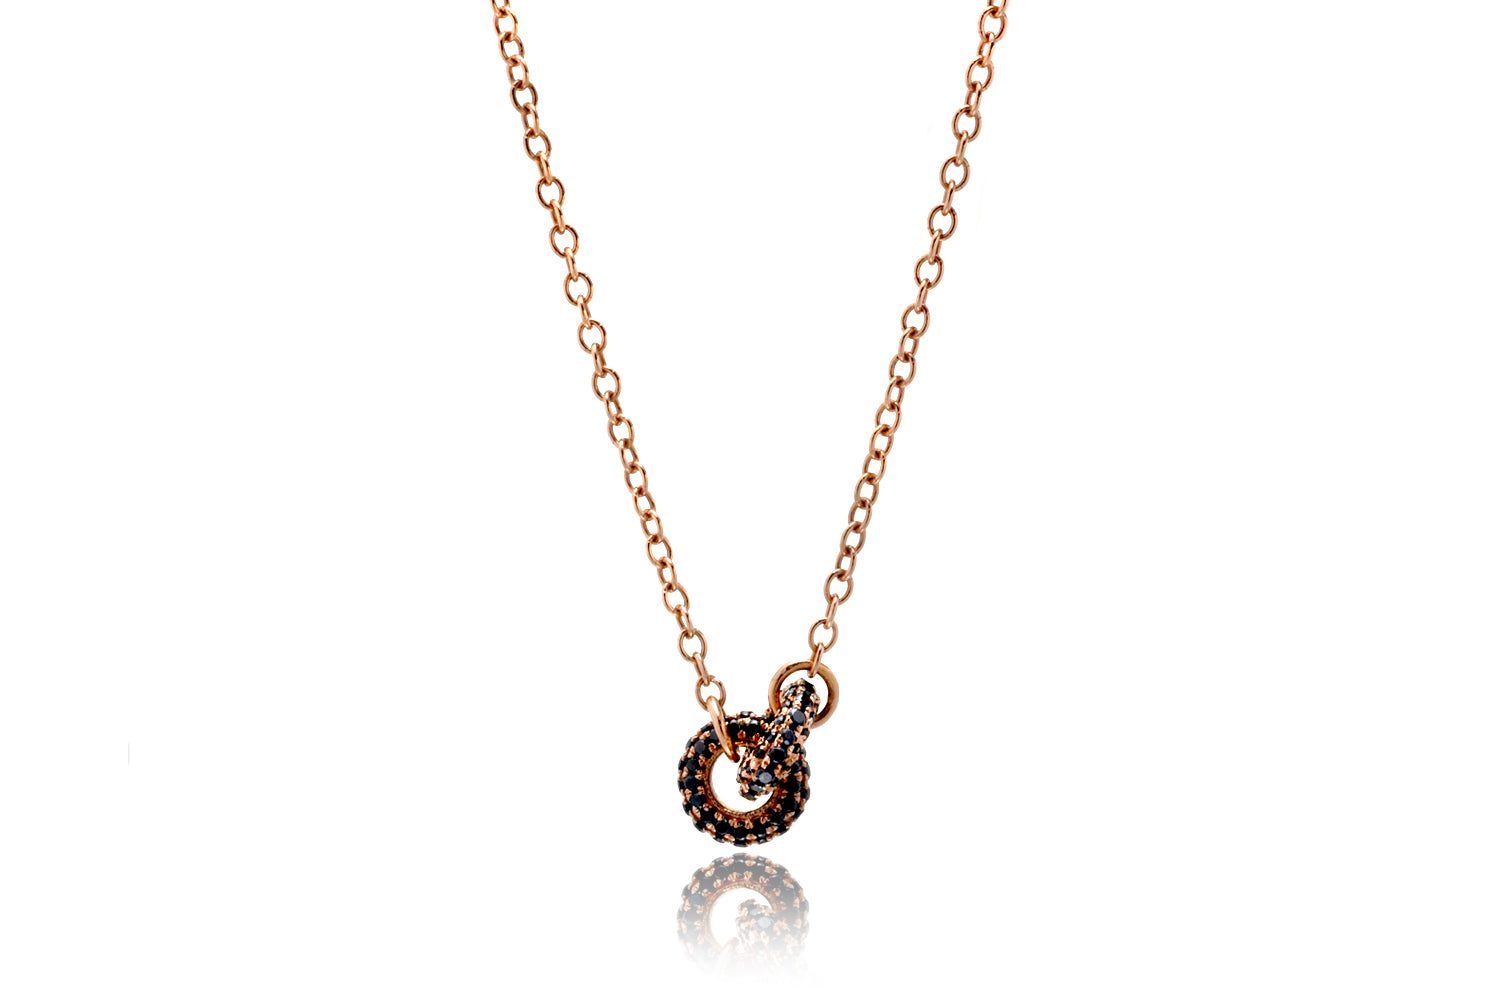 The Forever Linked Diamond Circle Necklace